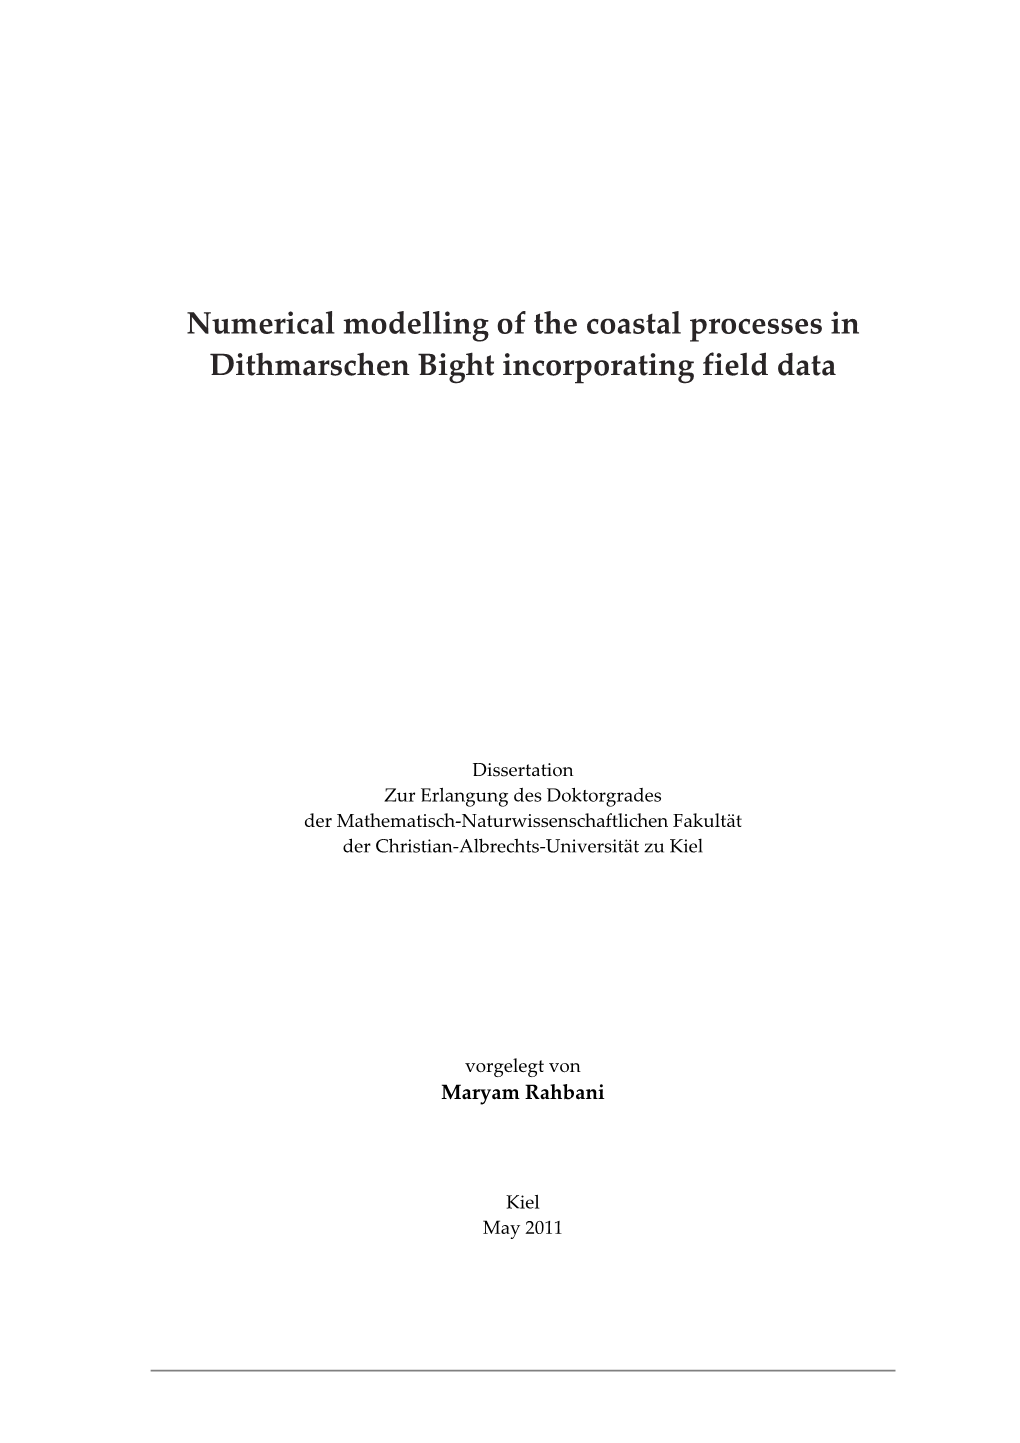 Numerical Modelling of the Coastal Processes in Dithmarschen Bight Incorporating Field Data